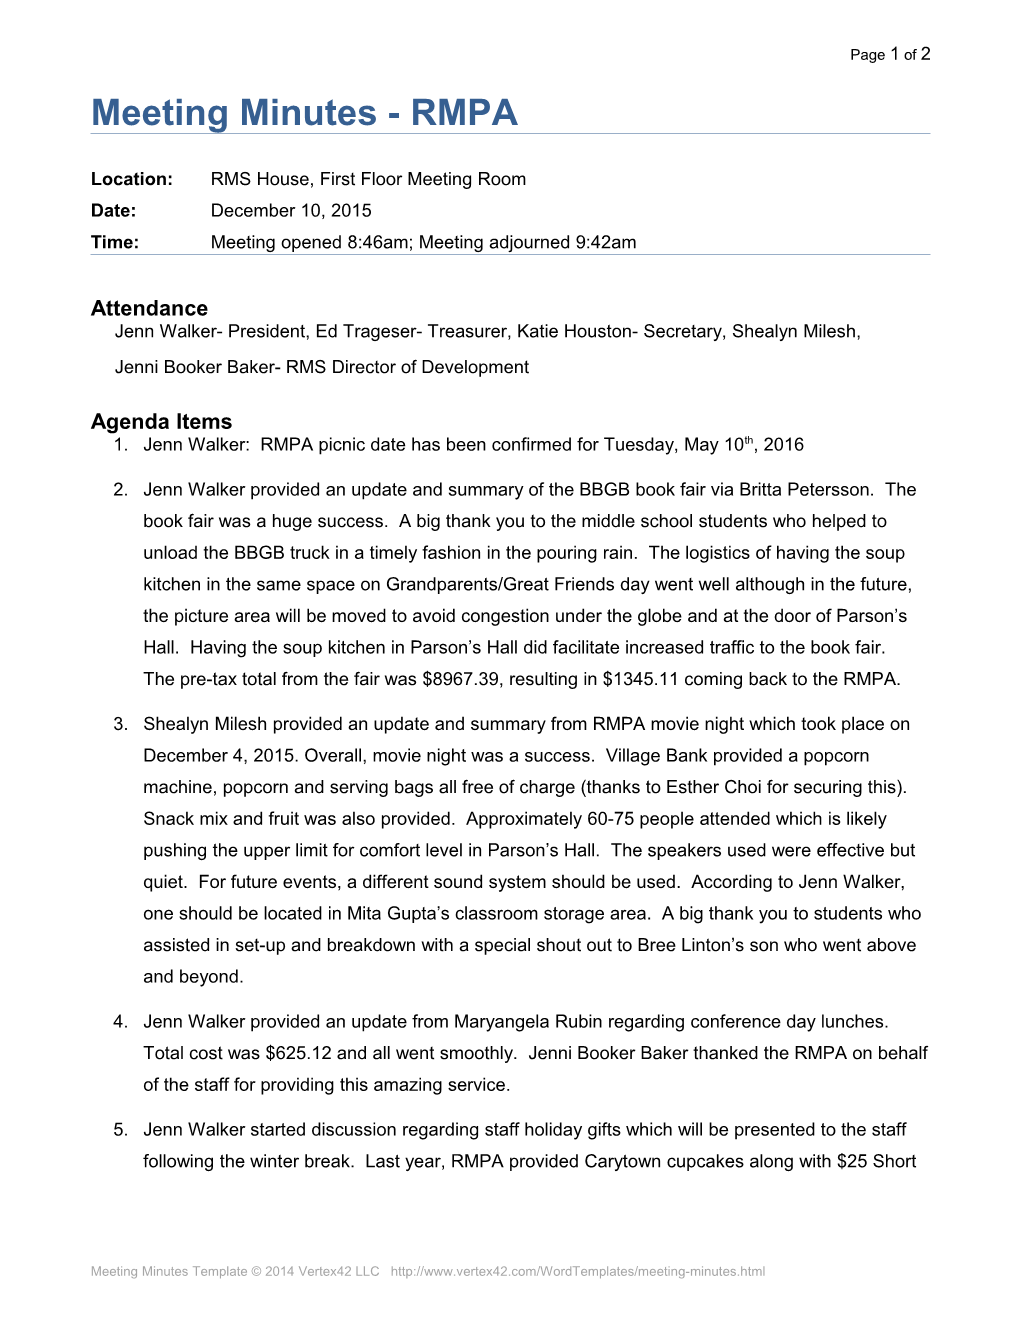 Meeting Minutes Template - Basic